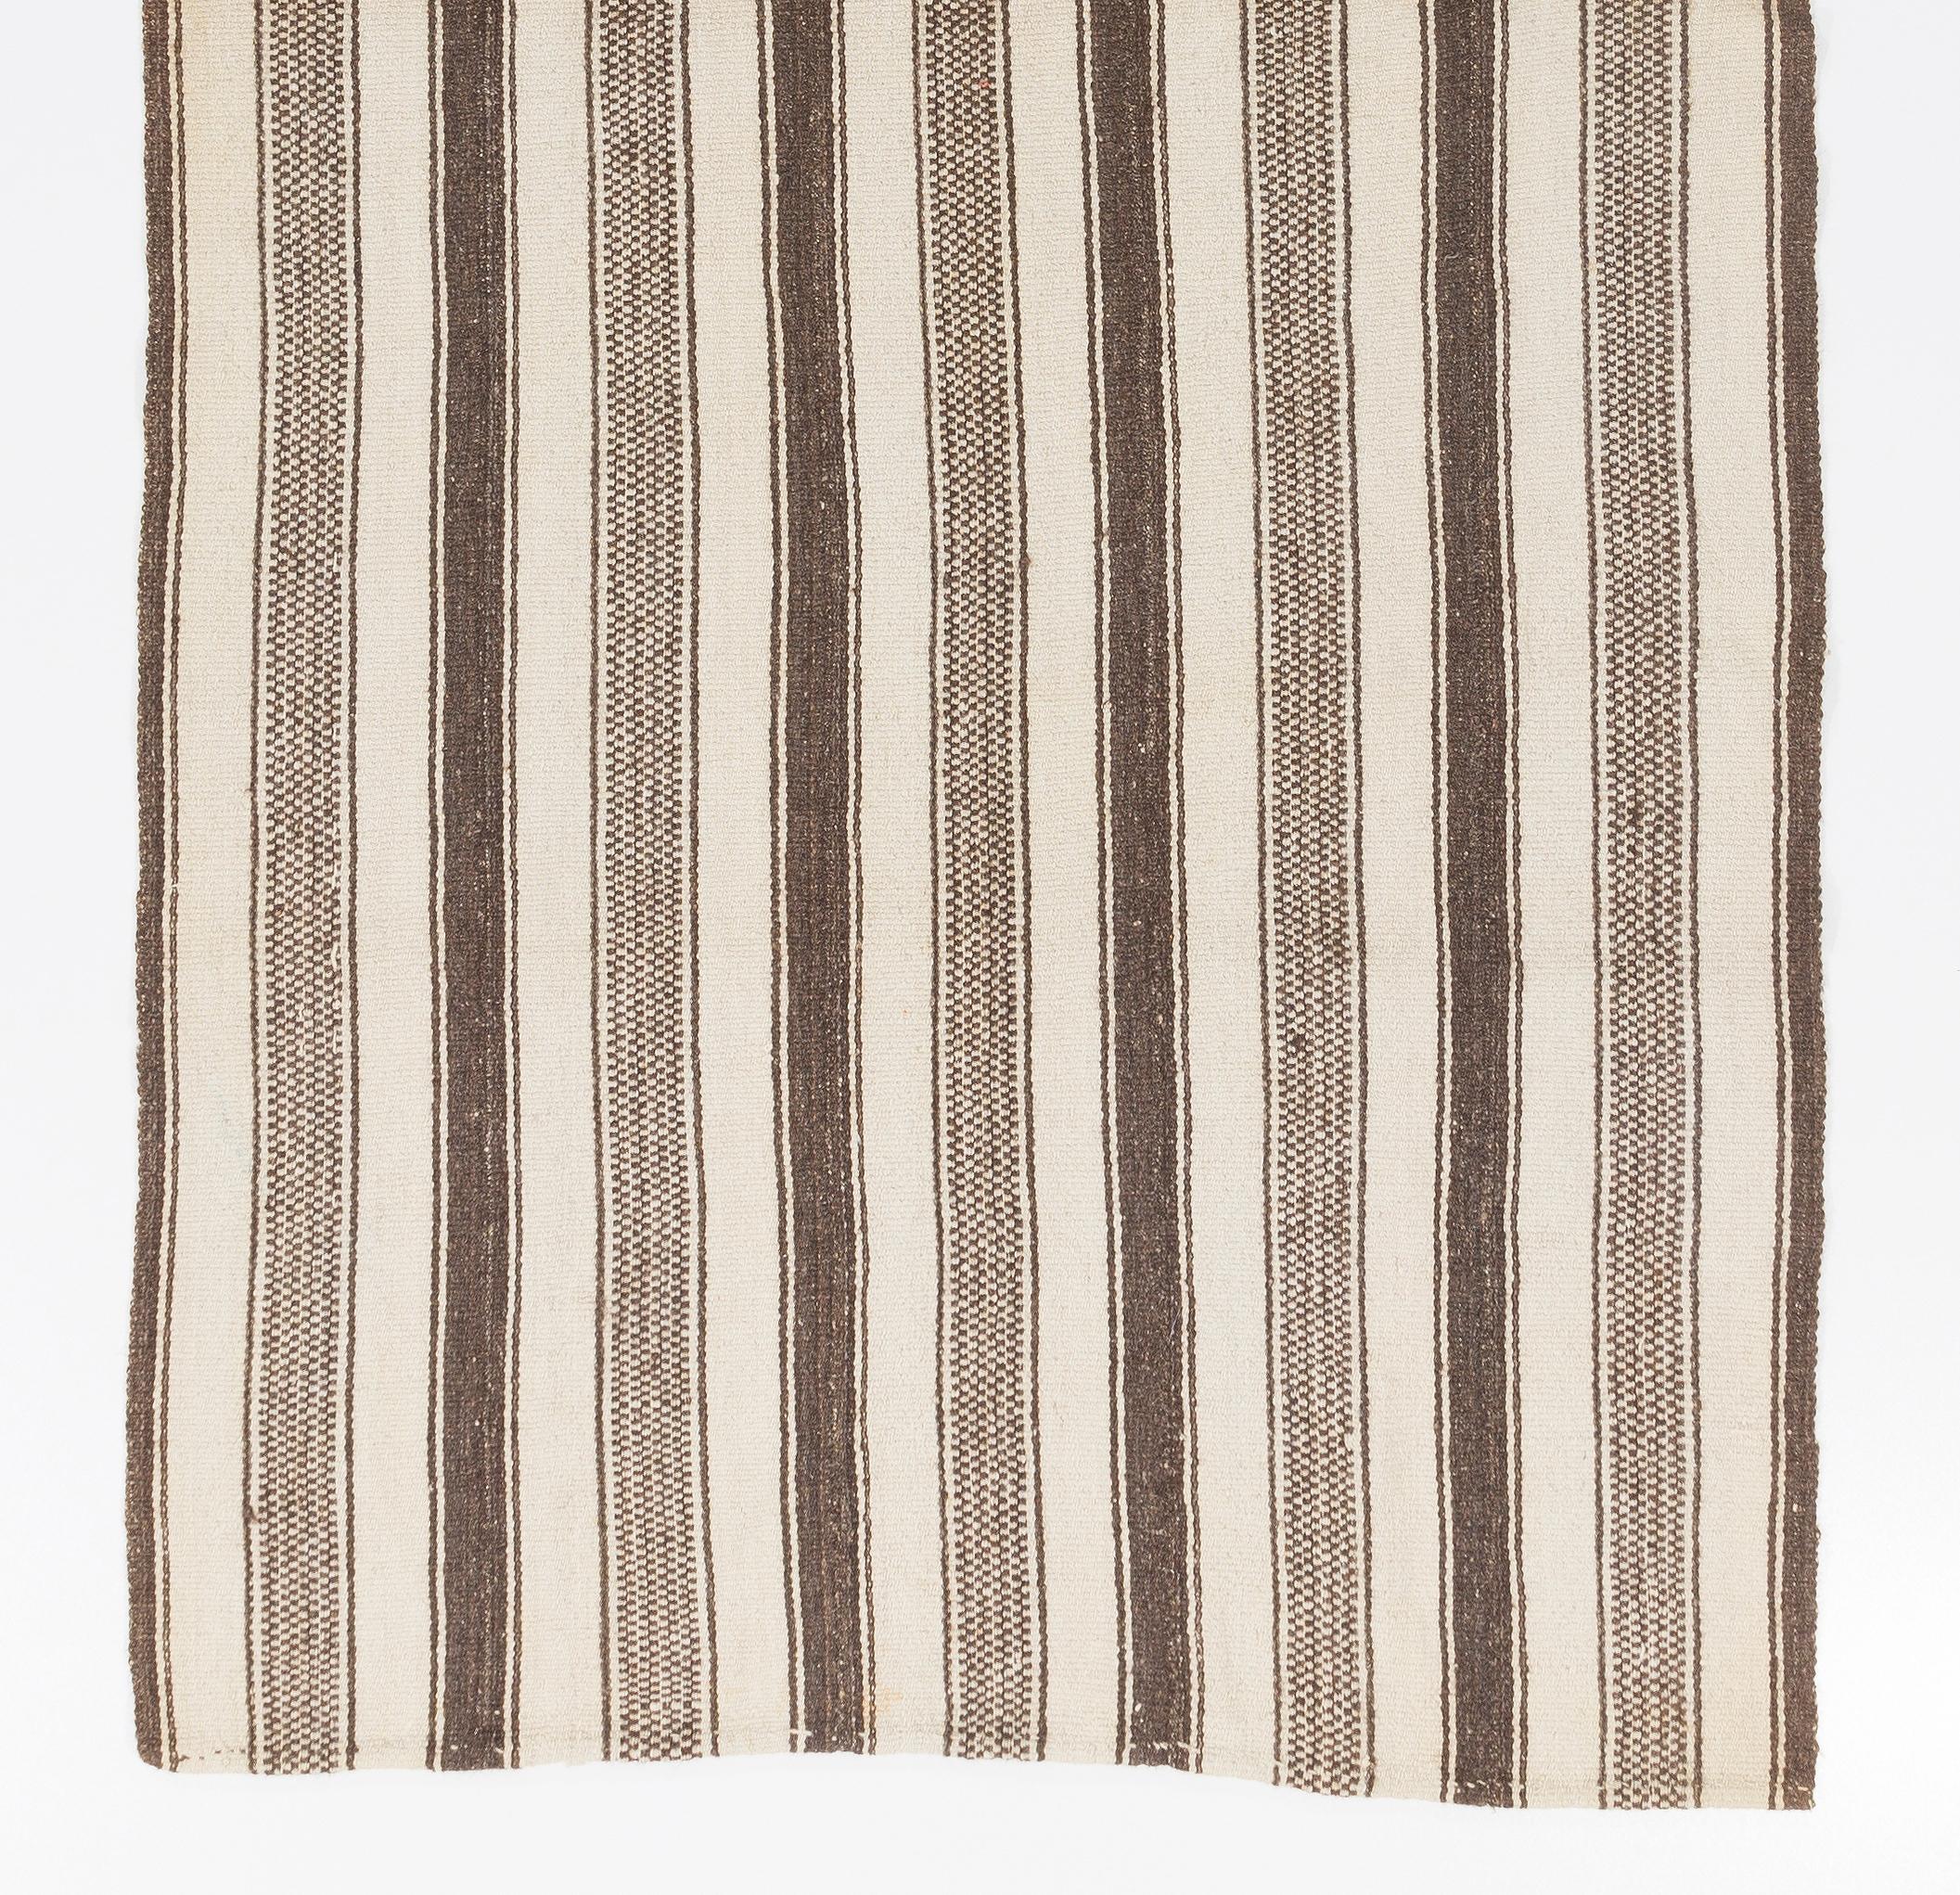 This simple handwoven rug made to be used by the villagers in Central Anatolia. 
100% natural un-dyed wool. Very good condition, sturdy and clean.
Ideal for both residential and commercial interiors. Measures: 4.4 x 9.2 ft.